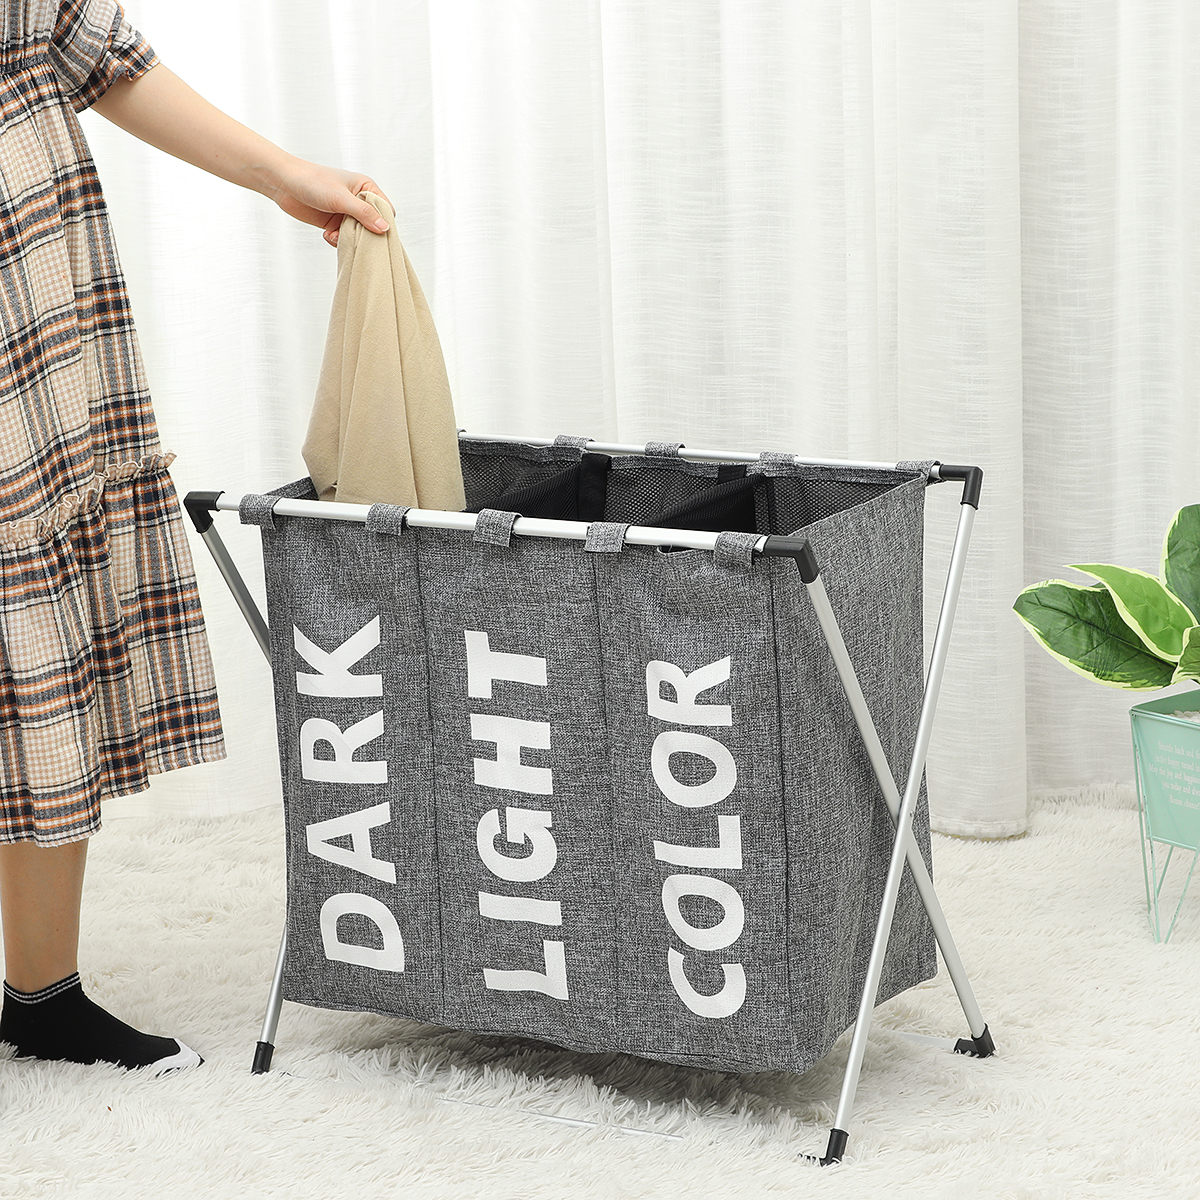 Foldable-Laundry-Basket-Folding-Dirty-Clothes-Bag-Washing-Bin-Home-Clothes-Organizer-with-Handle-1785430-15